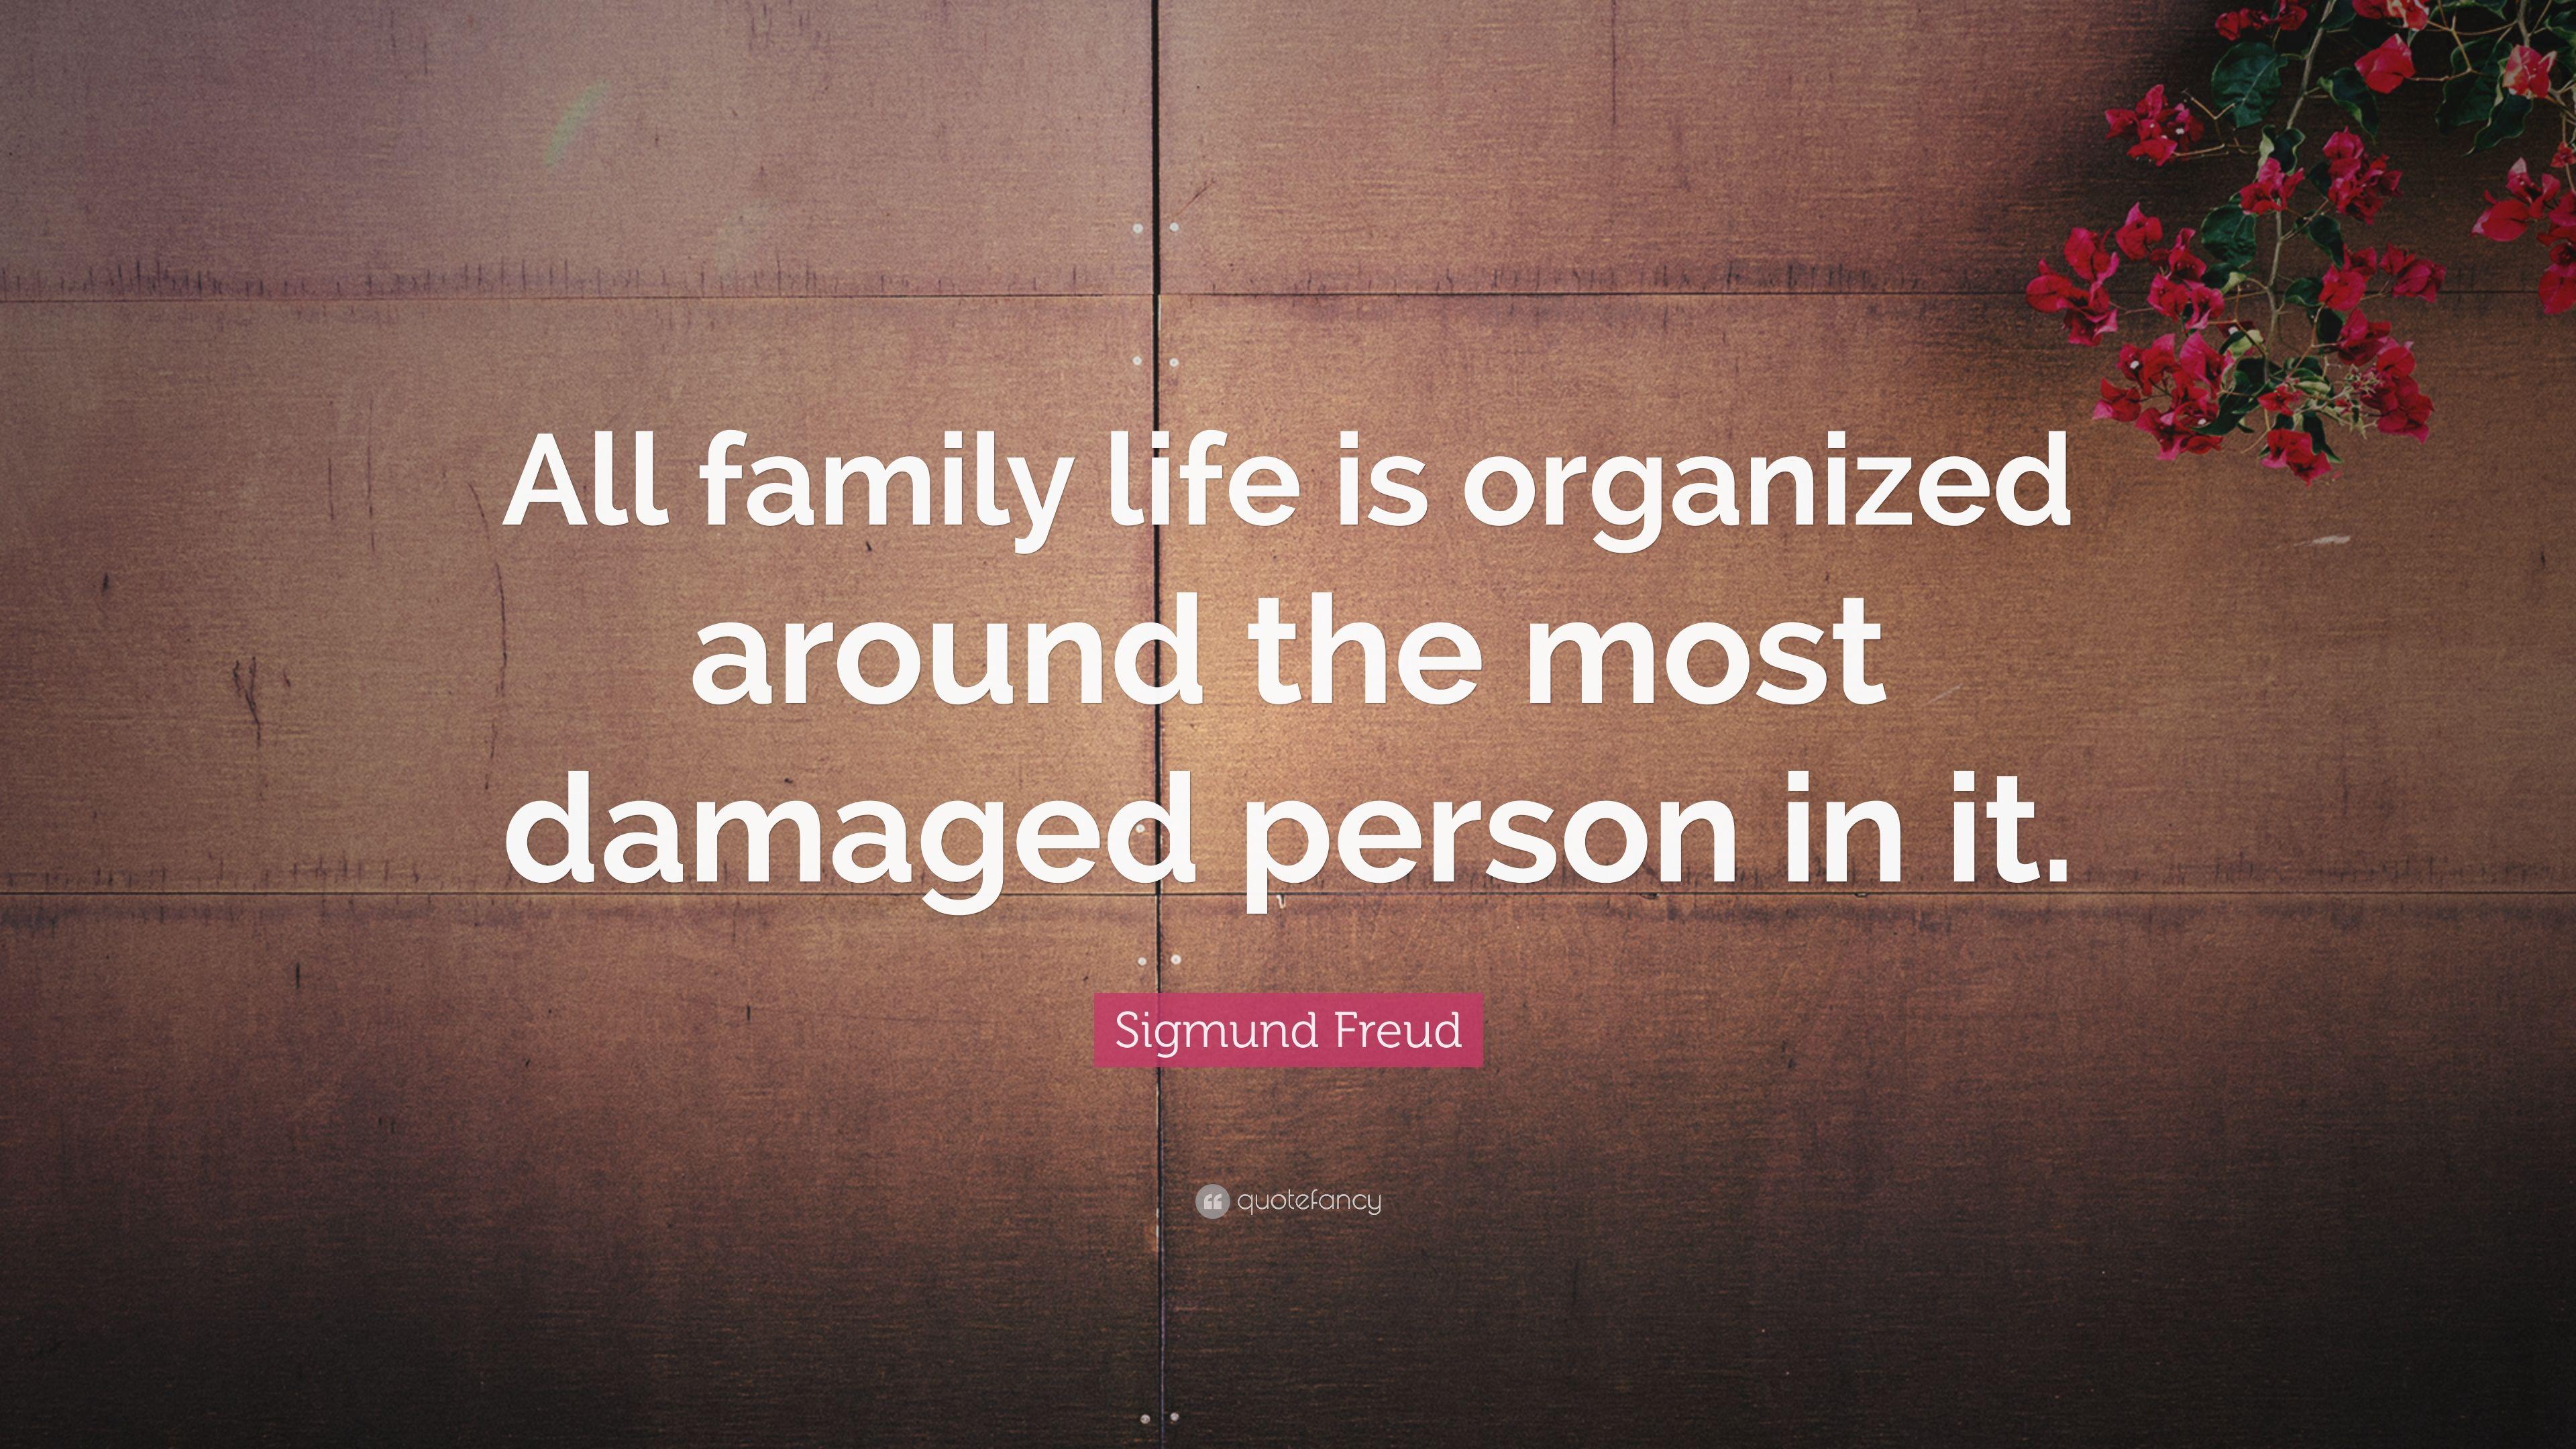 Sigmund Freud Quote: “All family life is organized around the most